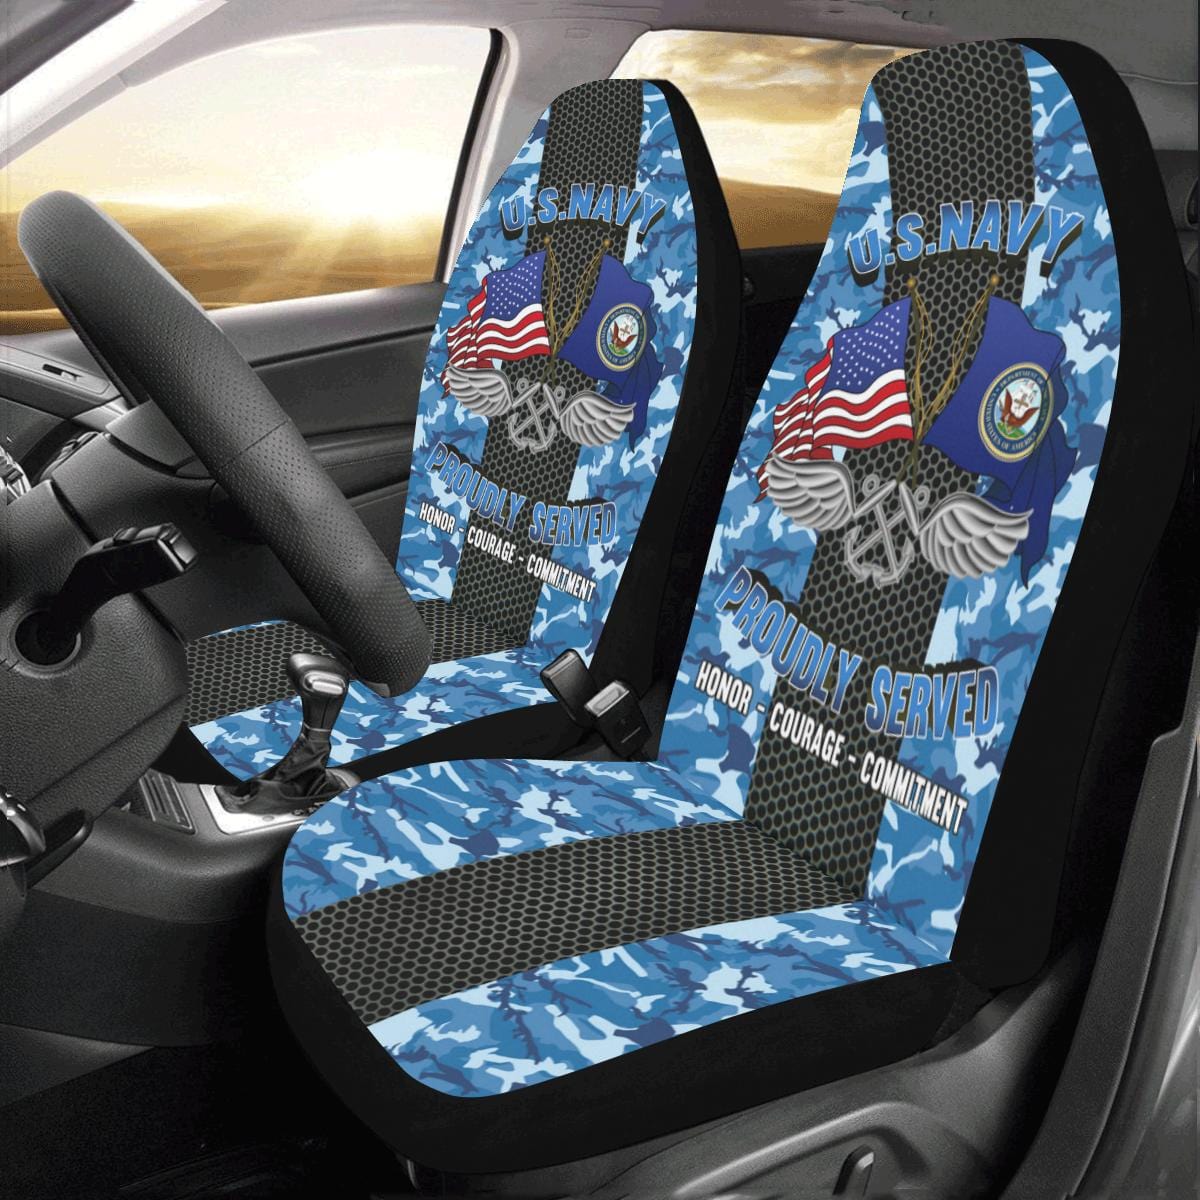 U.S Navy Aviation Boatswain's Mate Navy AB Car Seat Covers (Set of 2)-SeatCovers-Navy-Rate-Veterans Nation